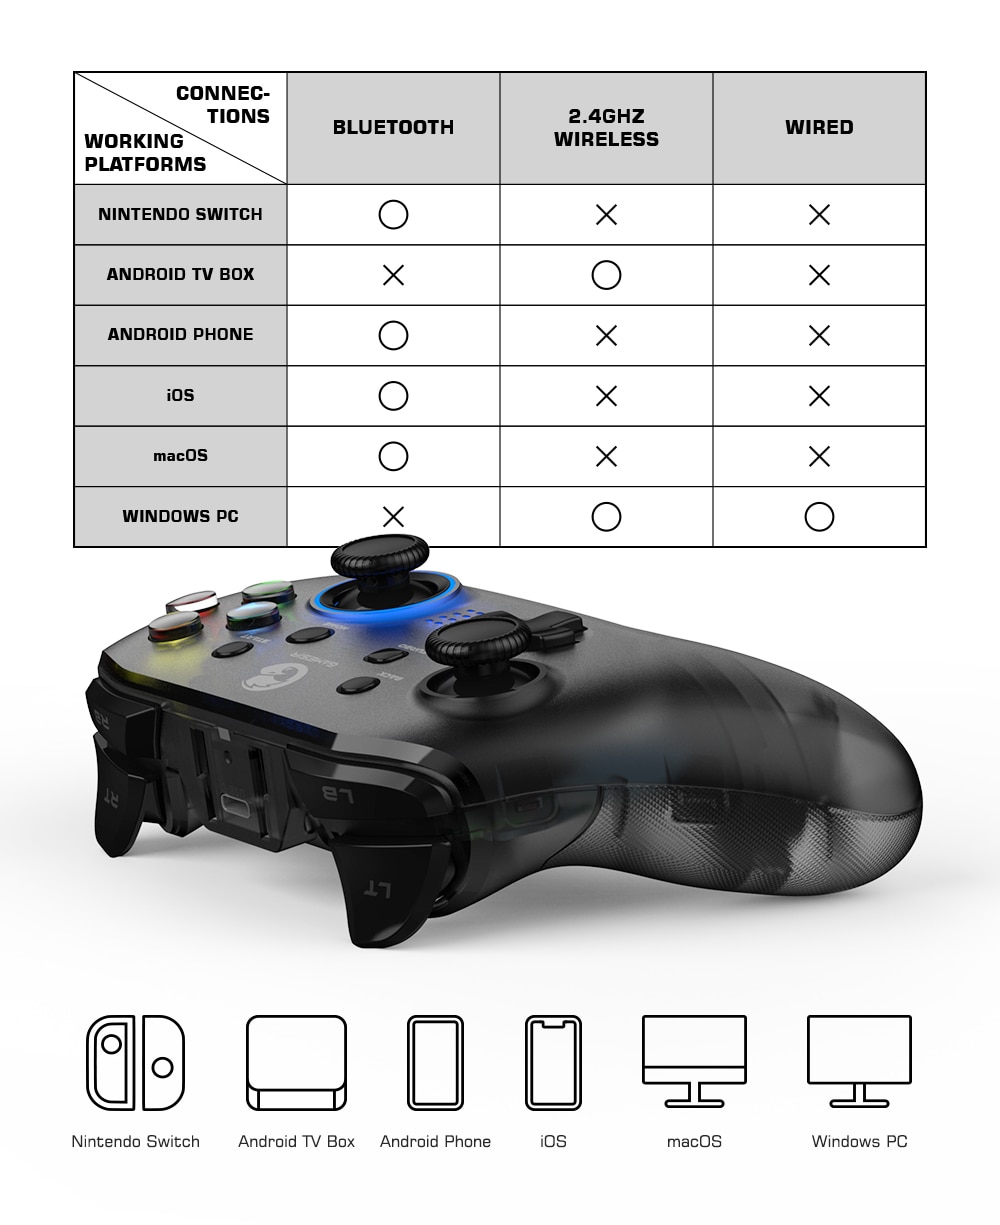 GameSir T4 Pro 2.4GHz Wireless Mobile Controller Bluetooth Gamepad with 6-axis Gyro for Nintendo Switch / Android / iPhone / PC